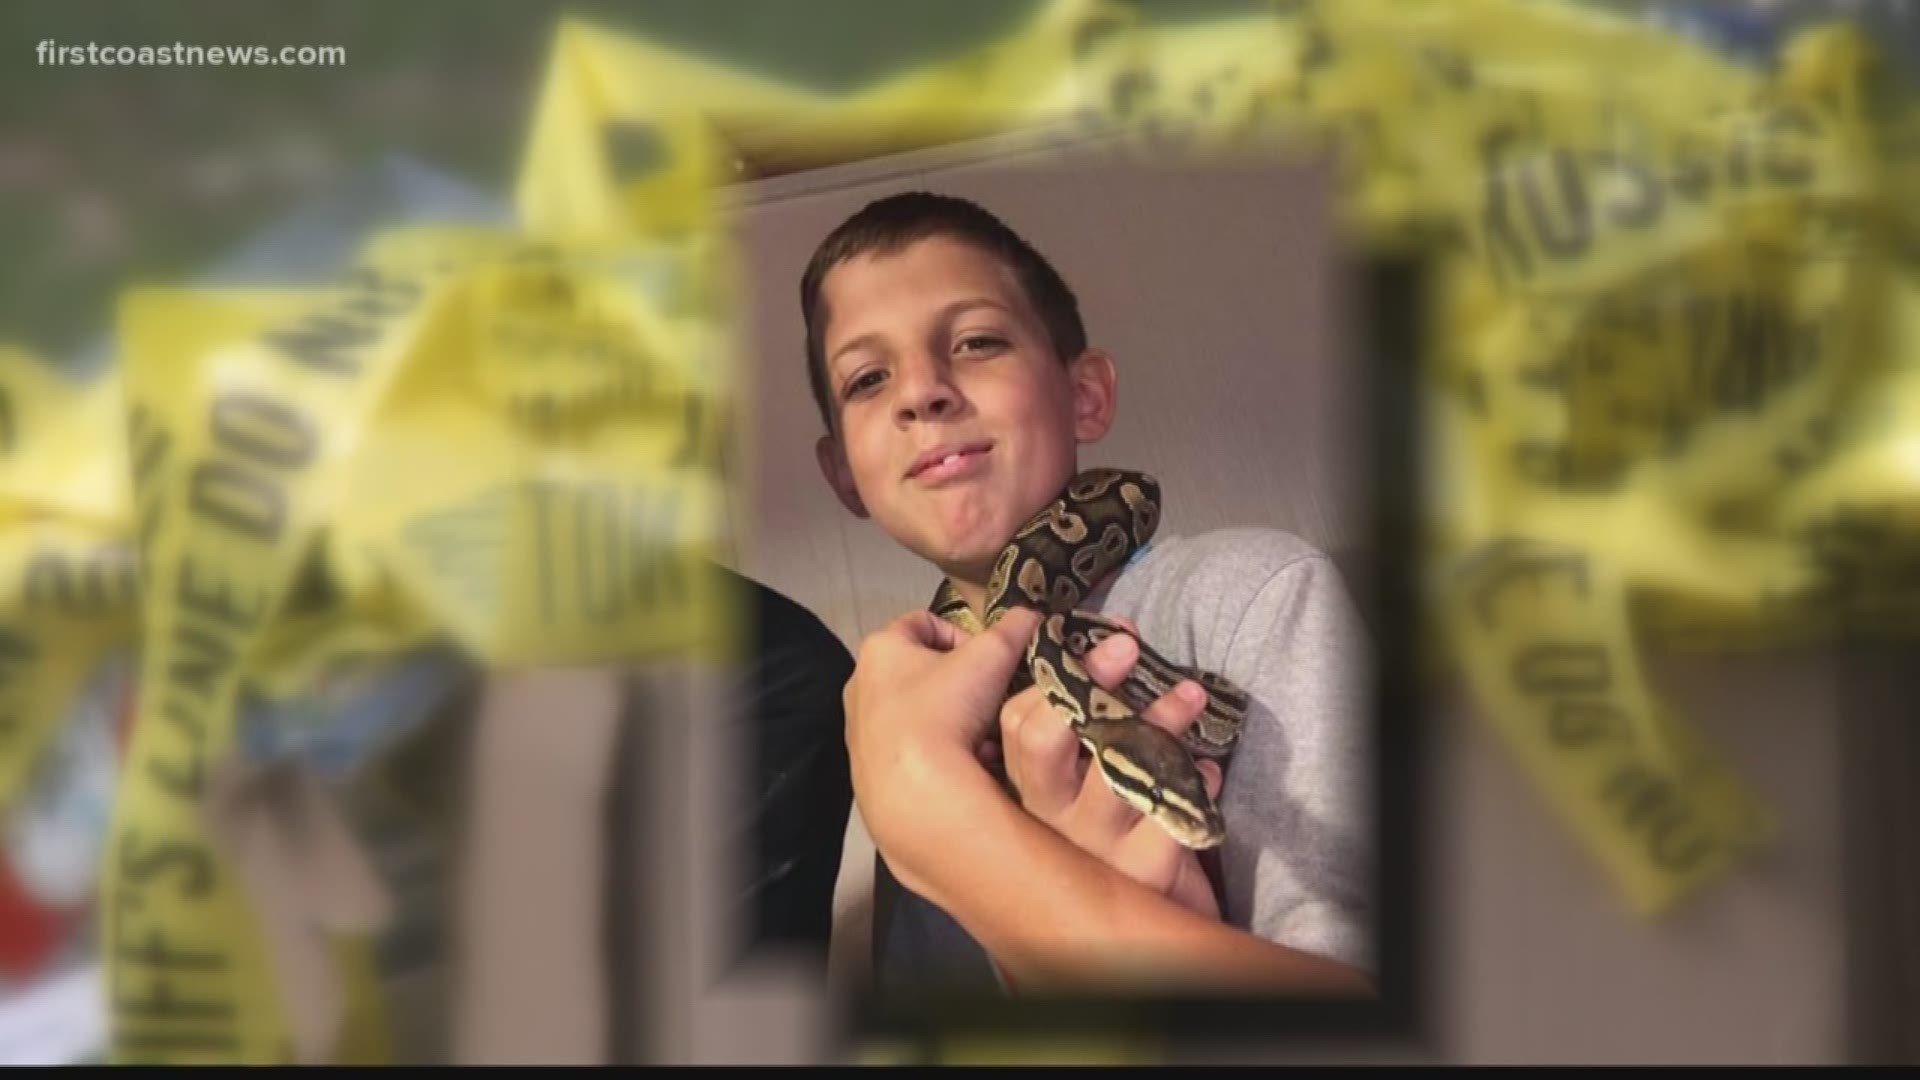 Neighbors say the family of 14-year-old Jason Vaughn were new to the community when the teen was shot and killed.